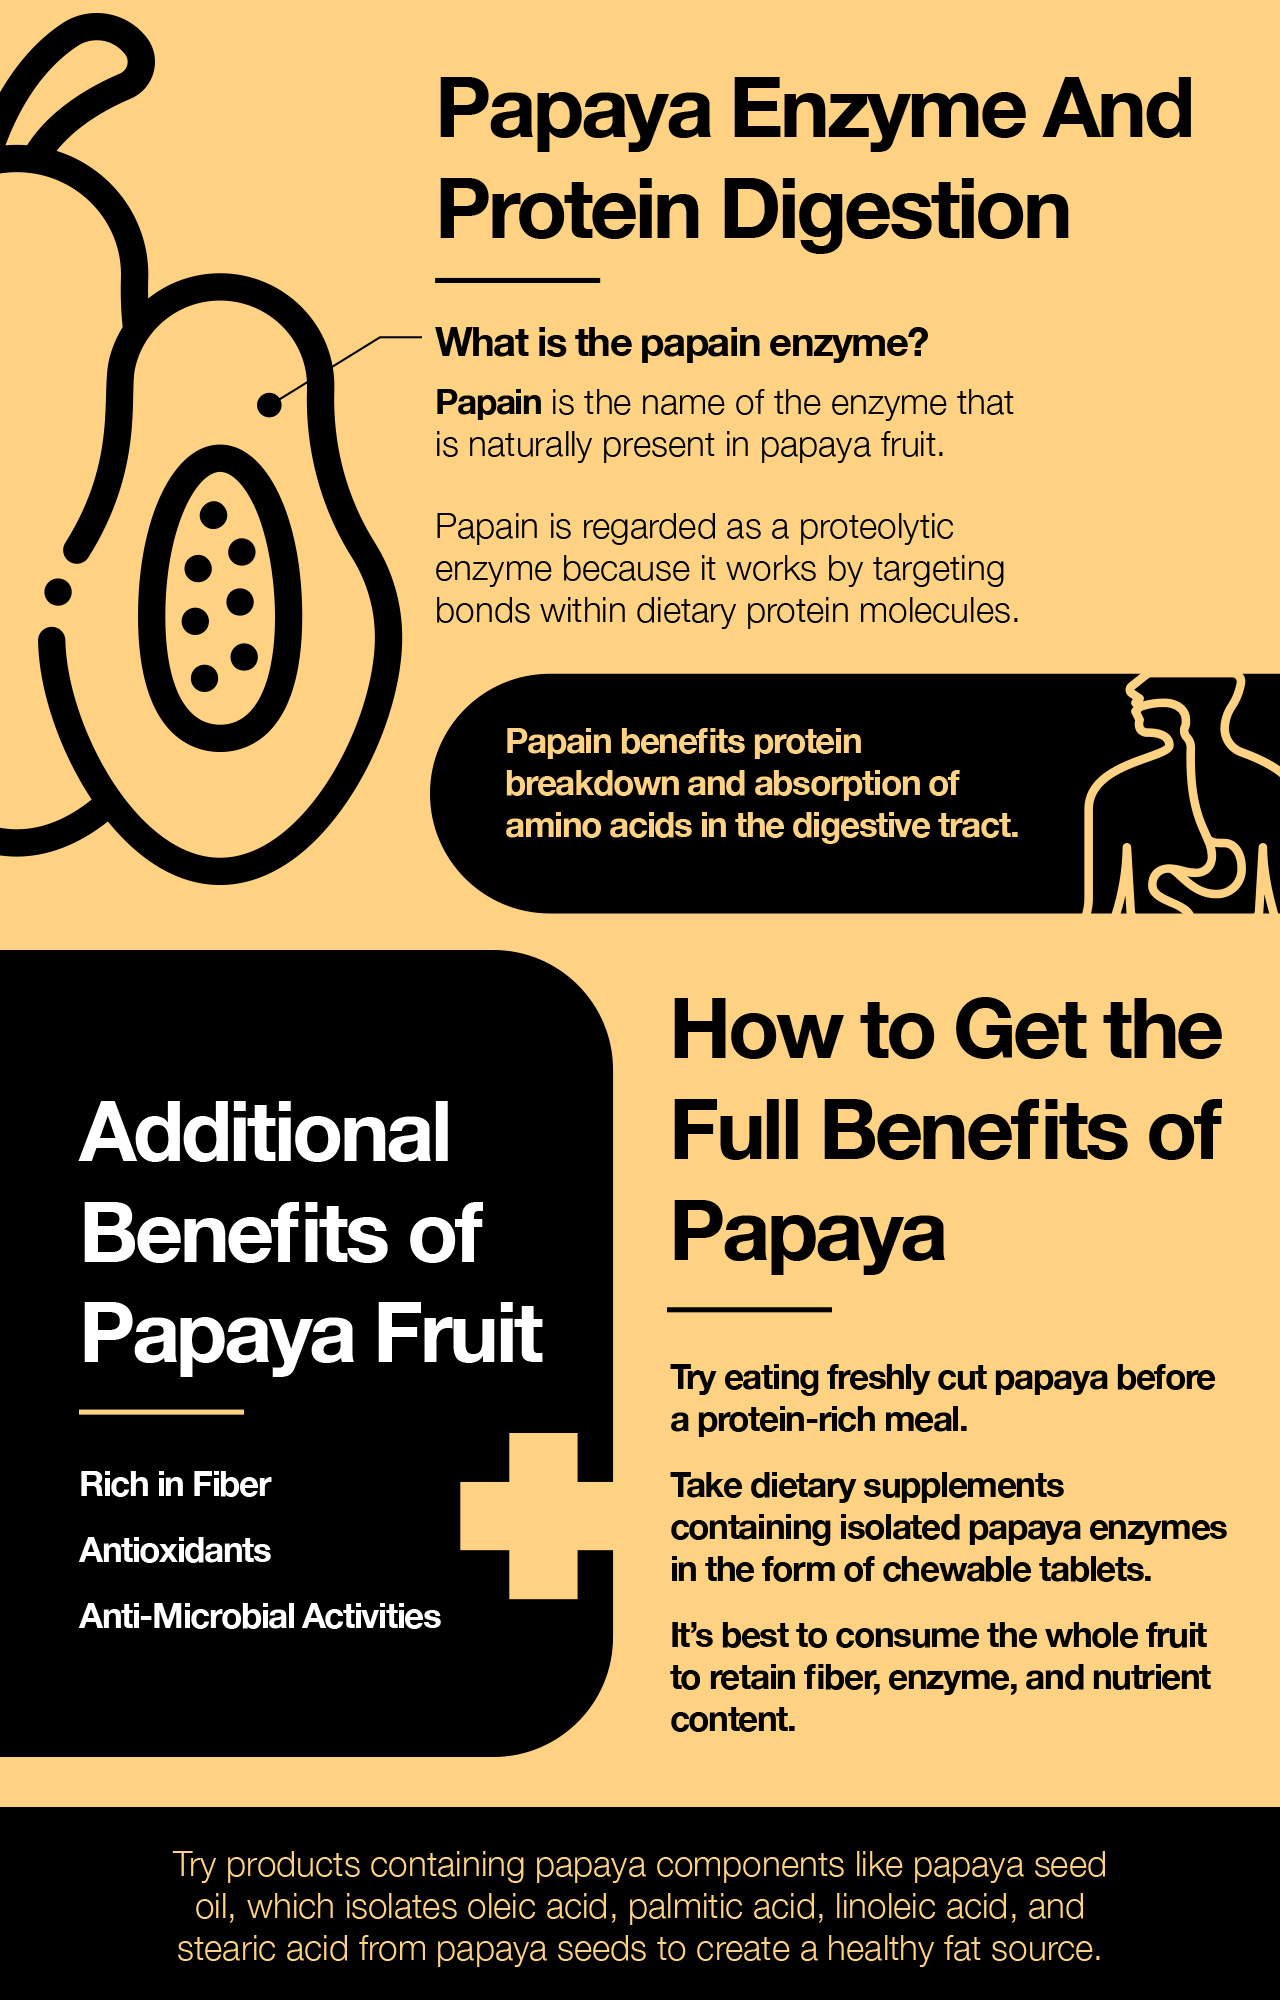 Papaya enzyme and protein digestion